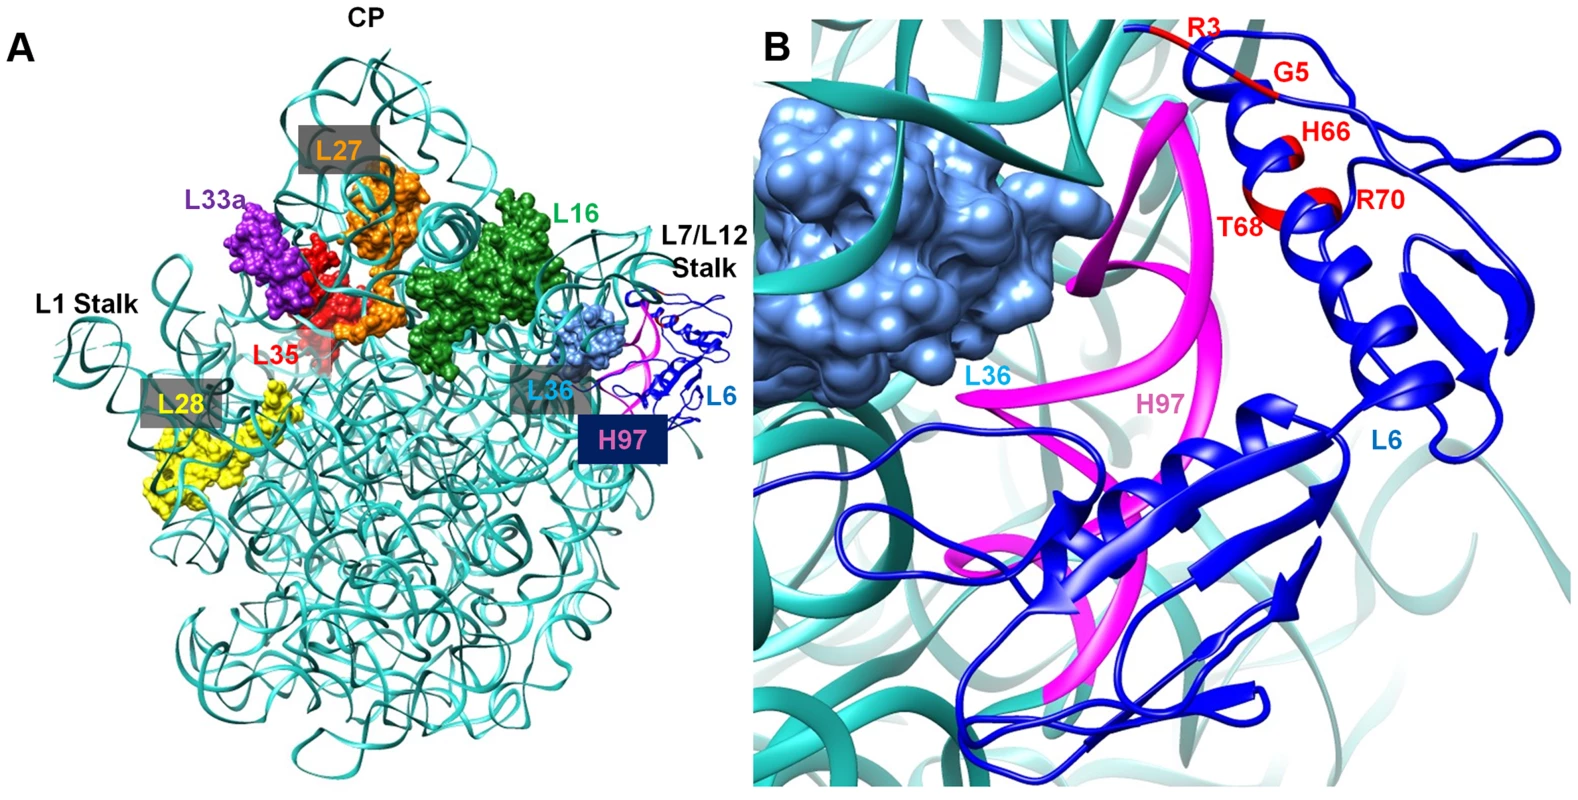 Interaction between L6 protein and the 50S ribosomal subunit.